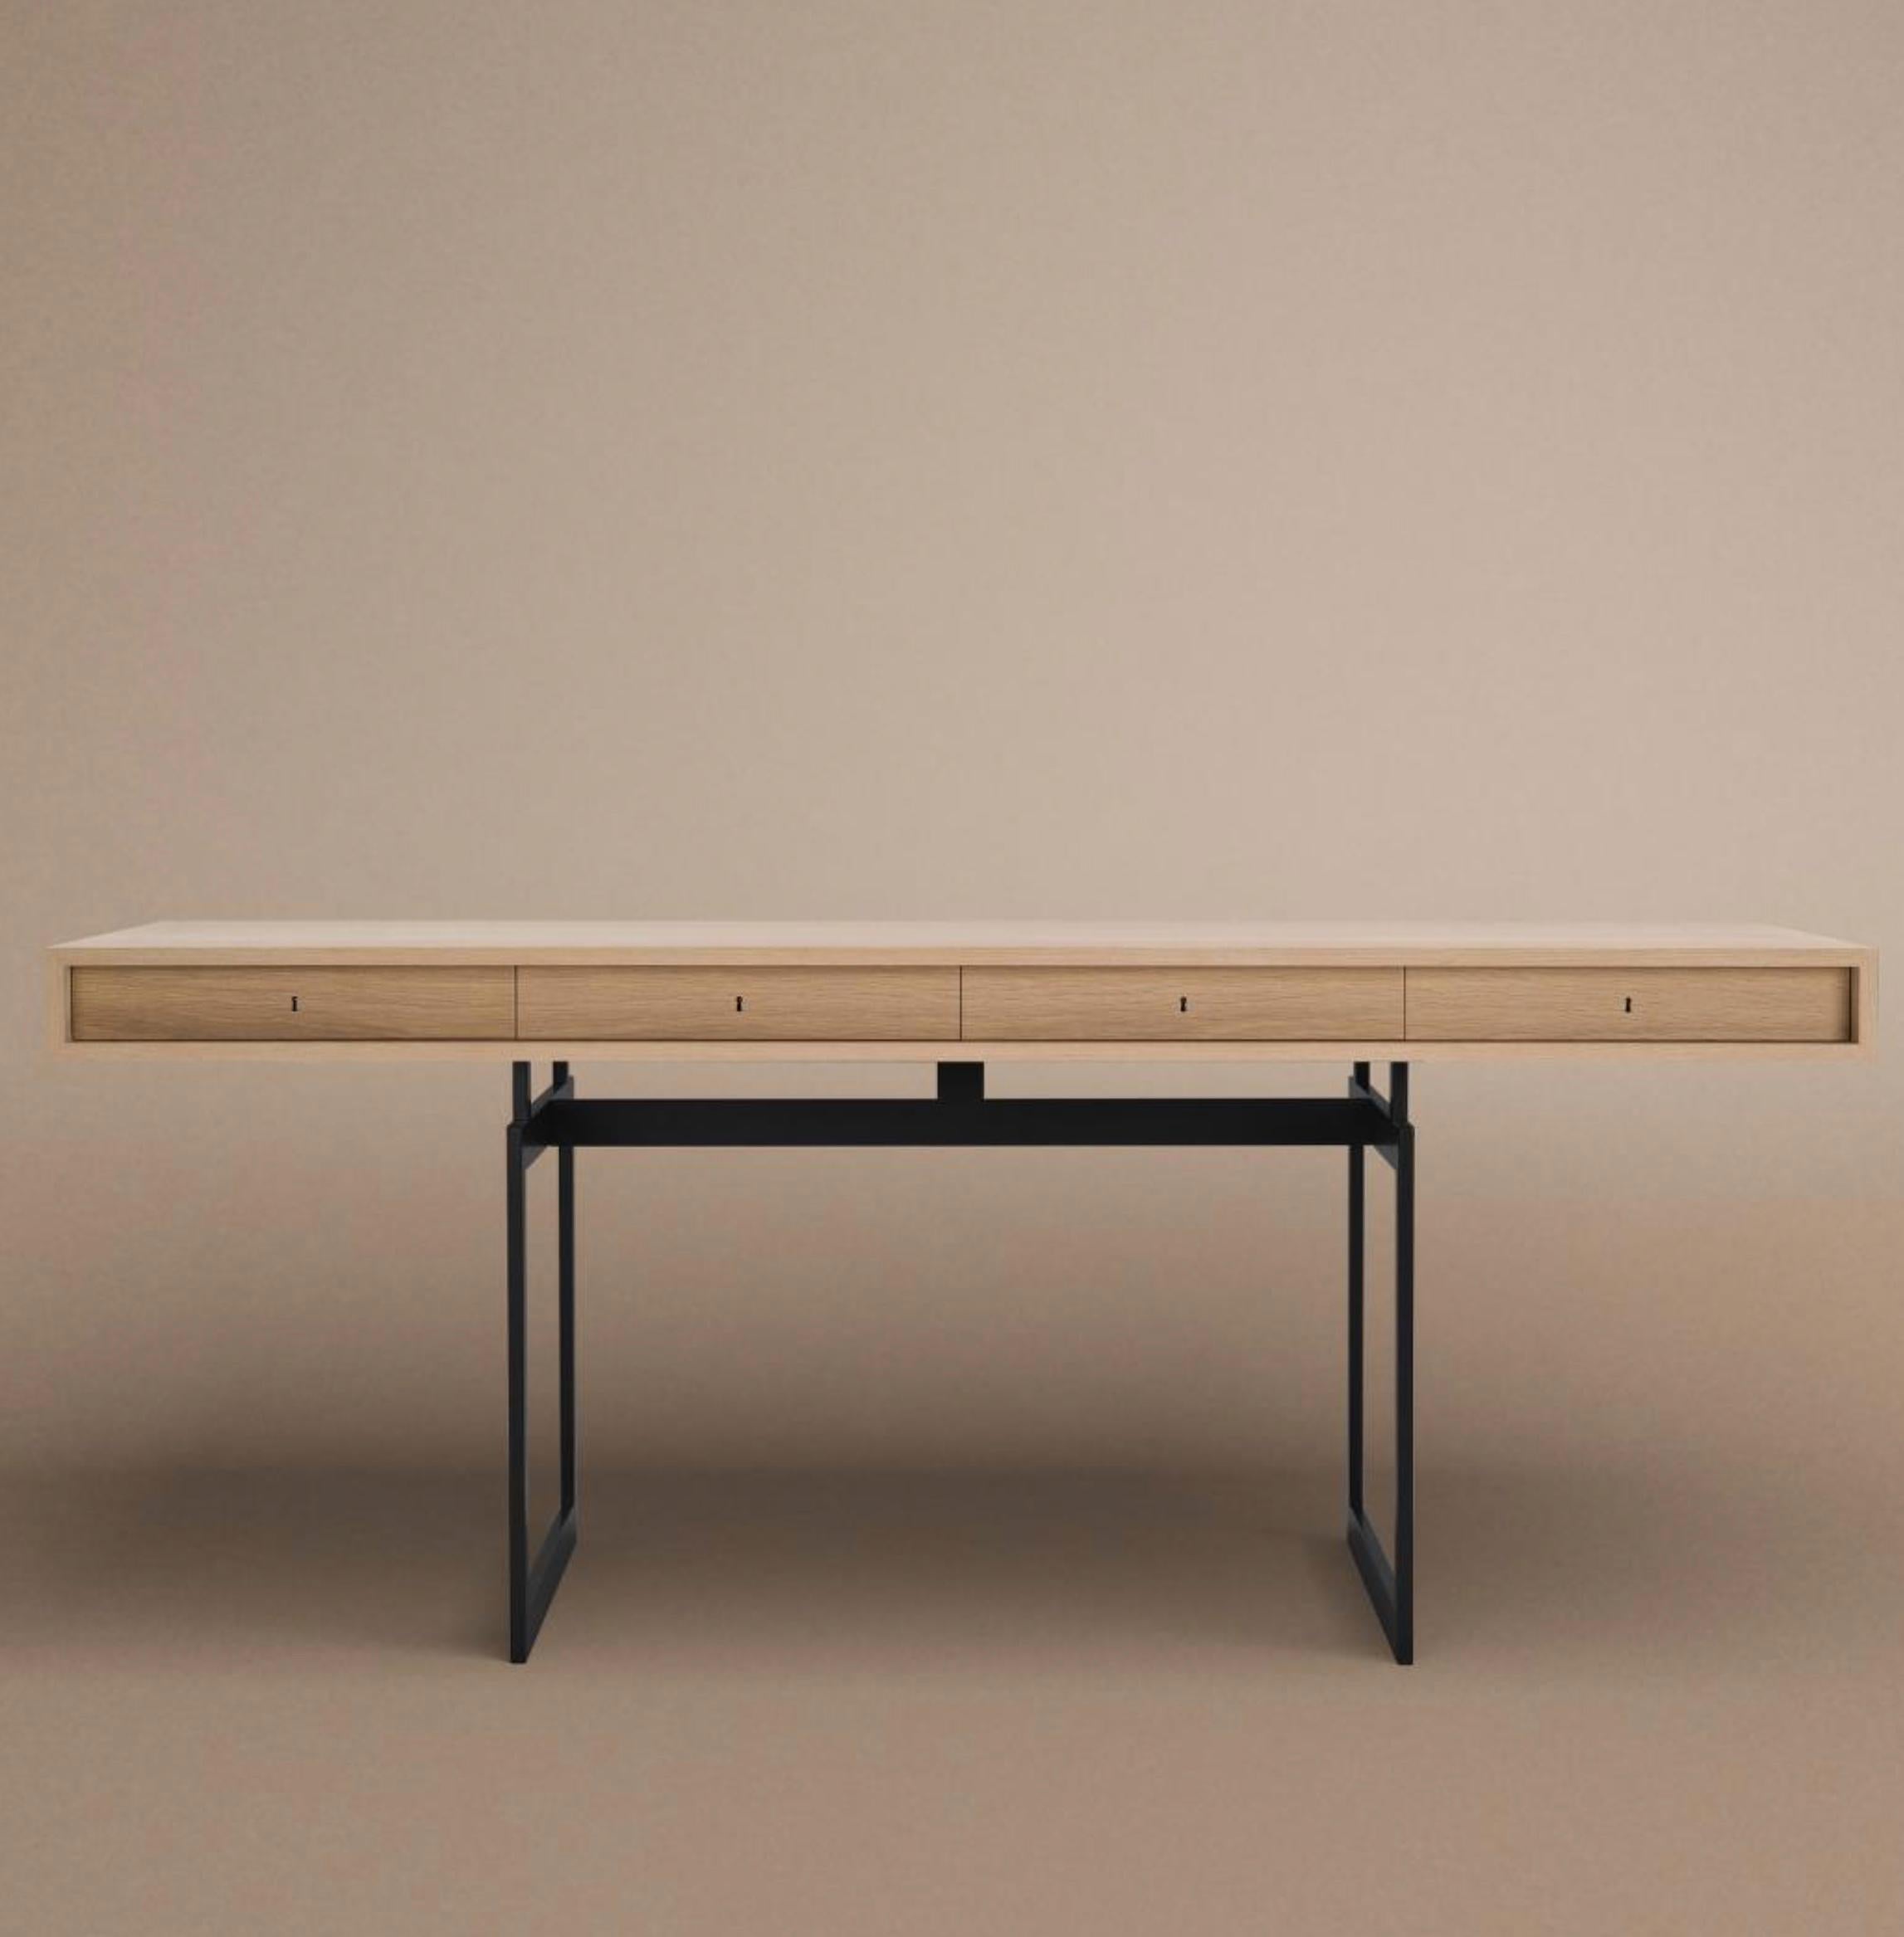 The iconic desk, designed in 1959, was the first of its kind with its pure and simplistic design, almost floating mid-air. Bodil Kjærs’ design has been called ‘The most beautiful desk in the world’ – or, the ‘James Bond desk’ as it was featured